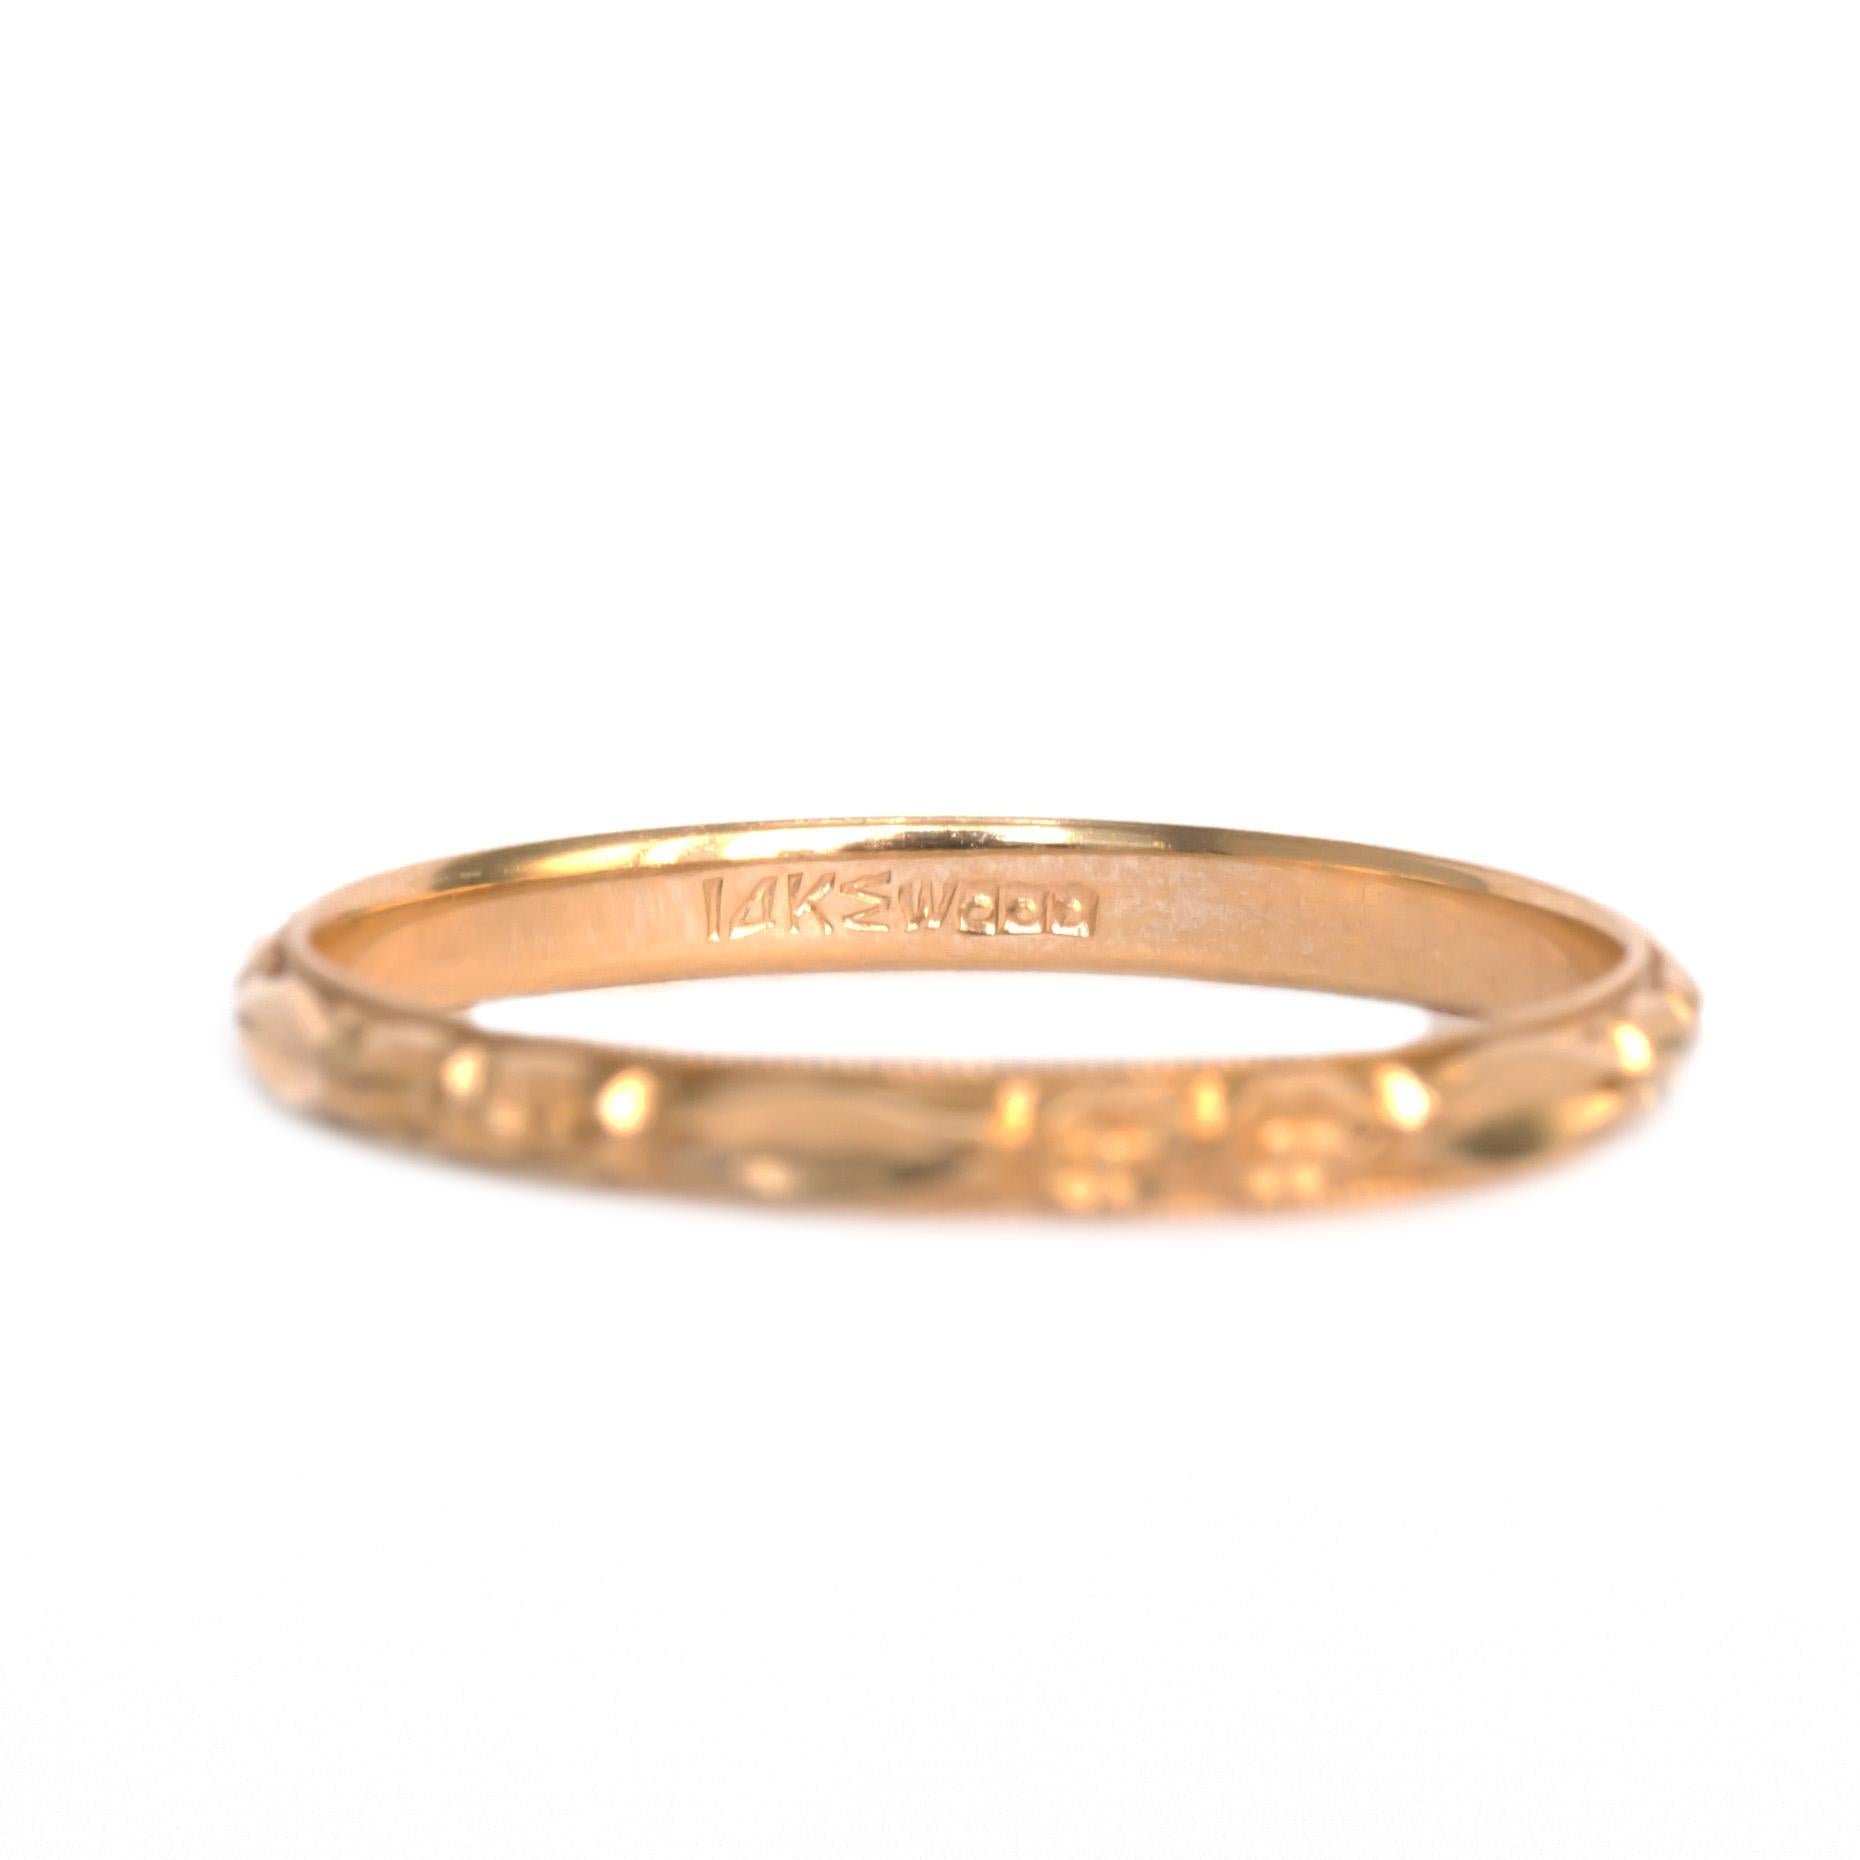 Ring Size: 7.5
Metal Type: 14 karat Yellow Gold [Hallmark & Tested]
Weight:  1.1 grams

Finger to Top of Stone Measurement: 1.1mm
Condition:  Excellent